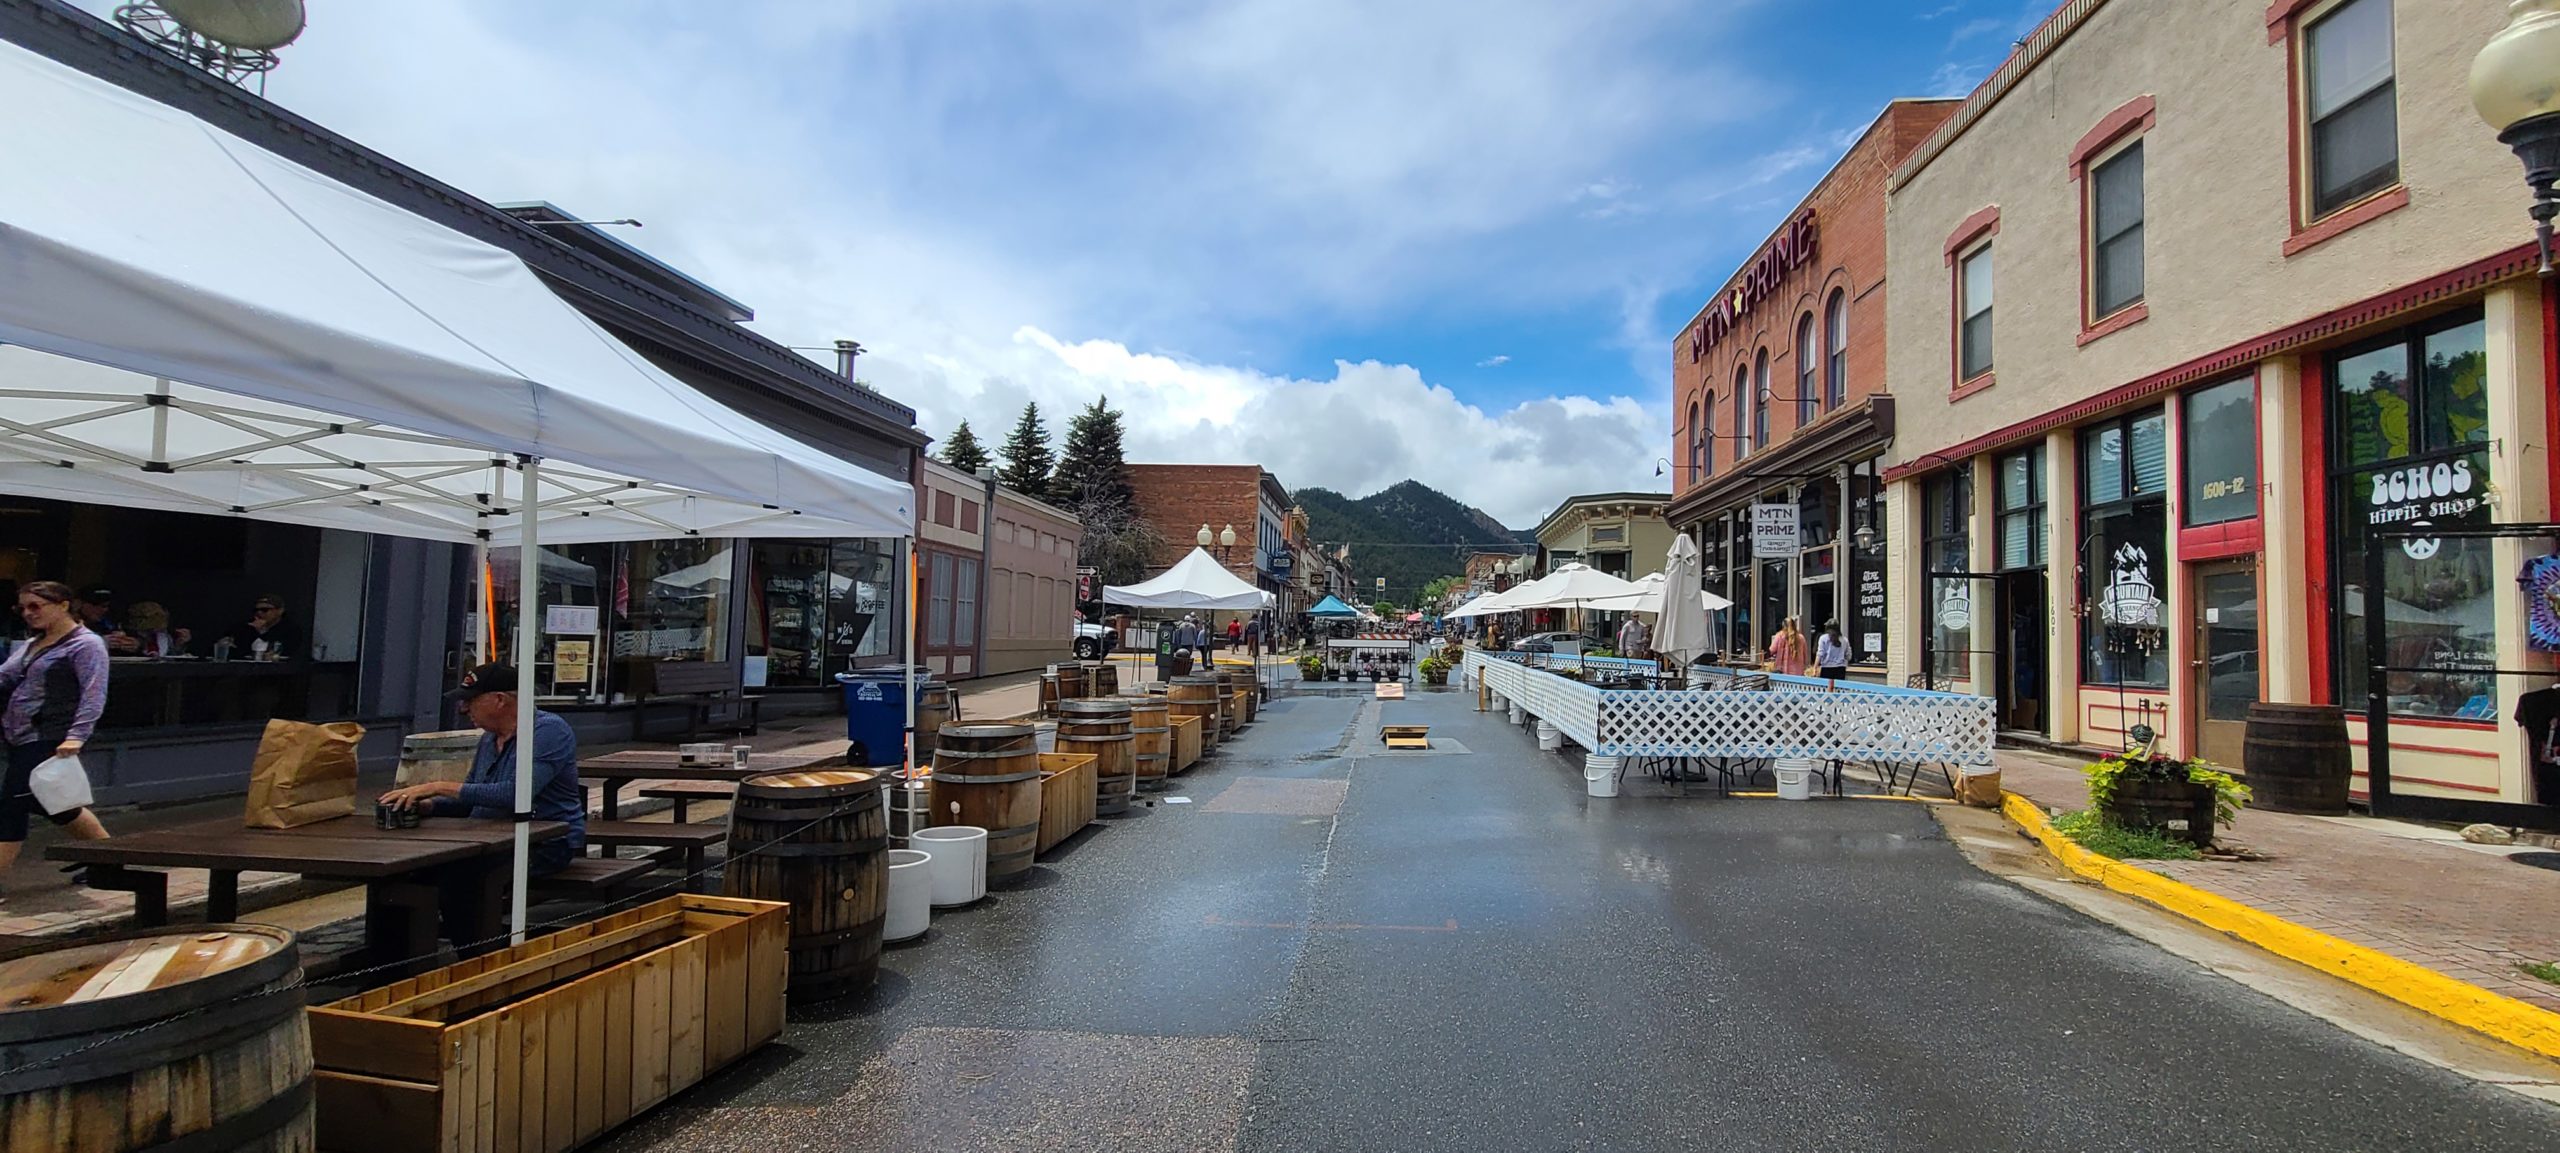 Main Street Idaho Springs lined with shops and outdoor dining